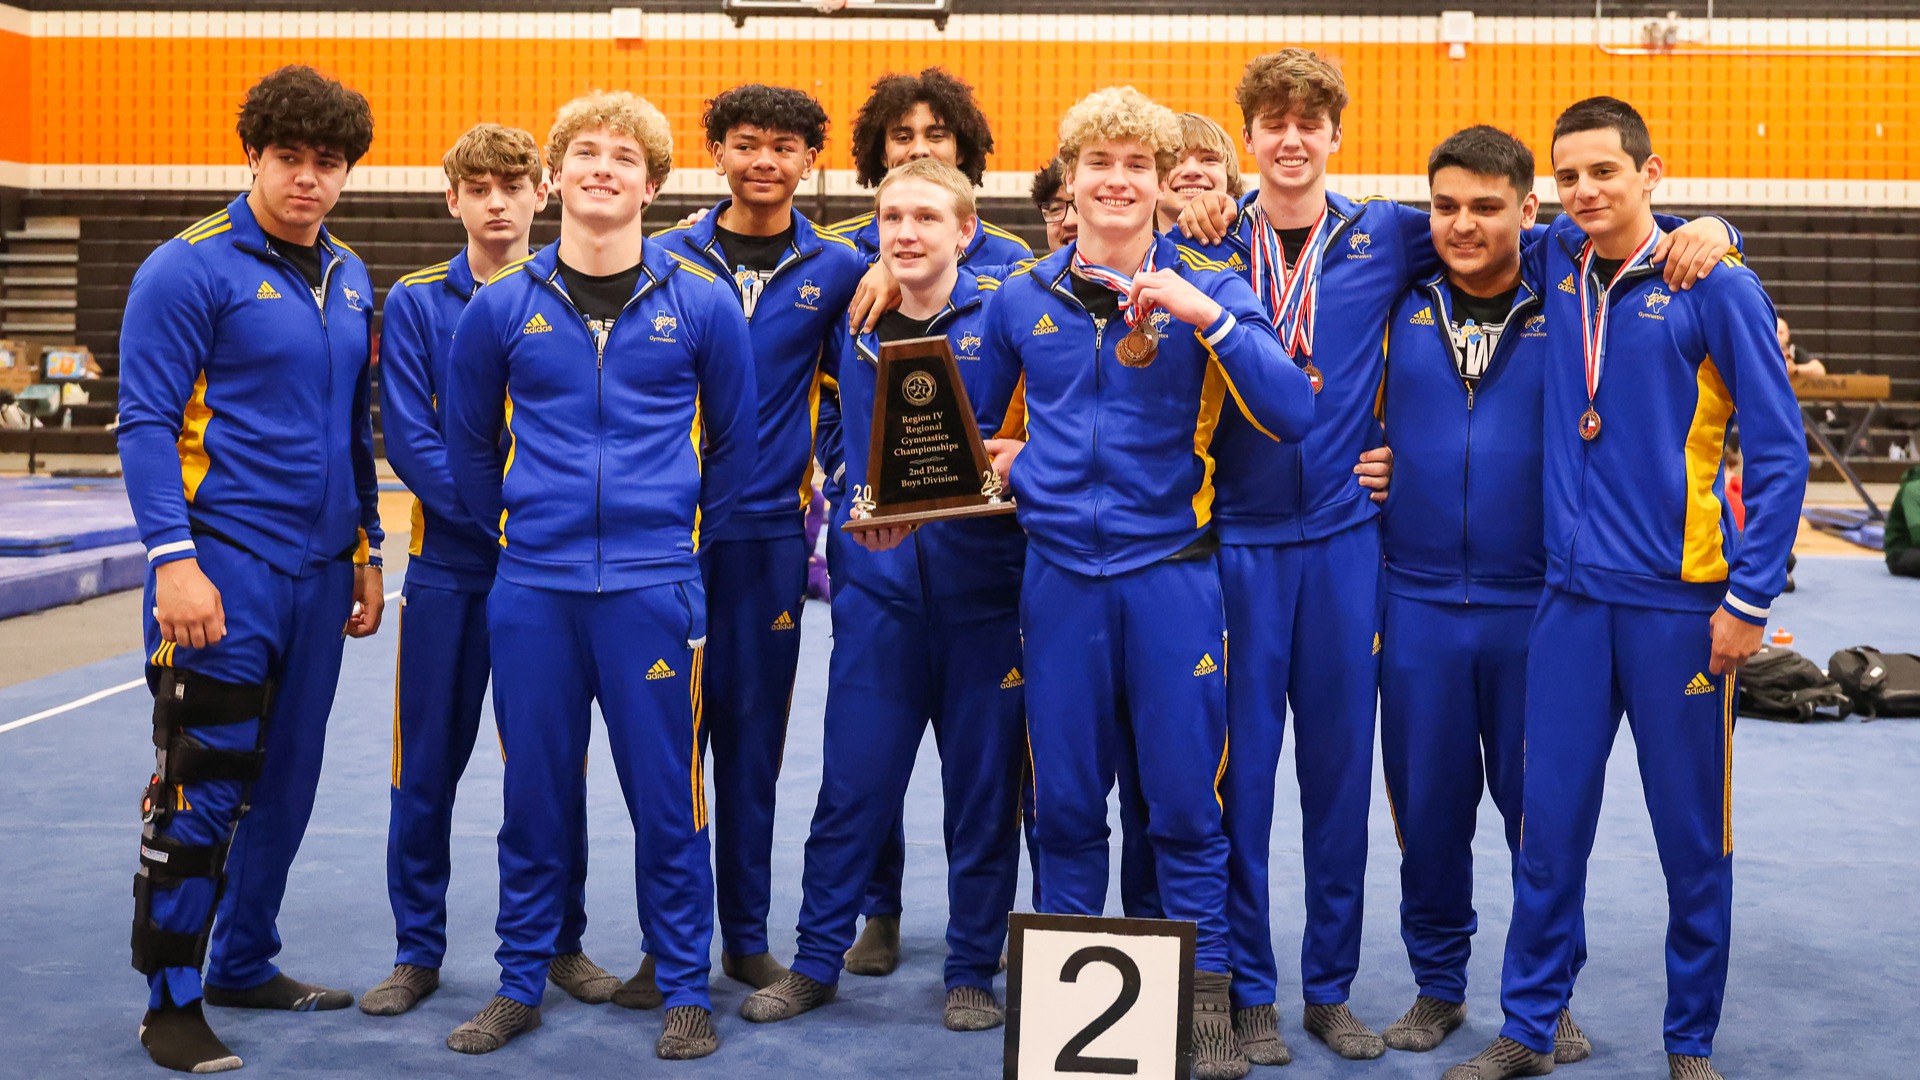 Boswell HSSlide 3 - BOSWELL GYMNASTICS ADVANCES TO STATE AFTER CLAIMING SECOND AND THIRD AT REGIONAL CHAMPIONSHIPS